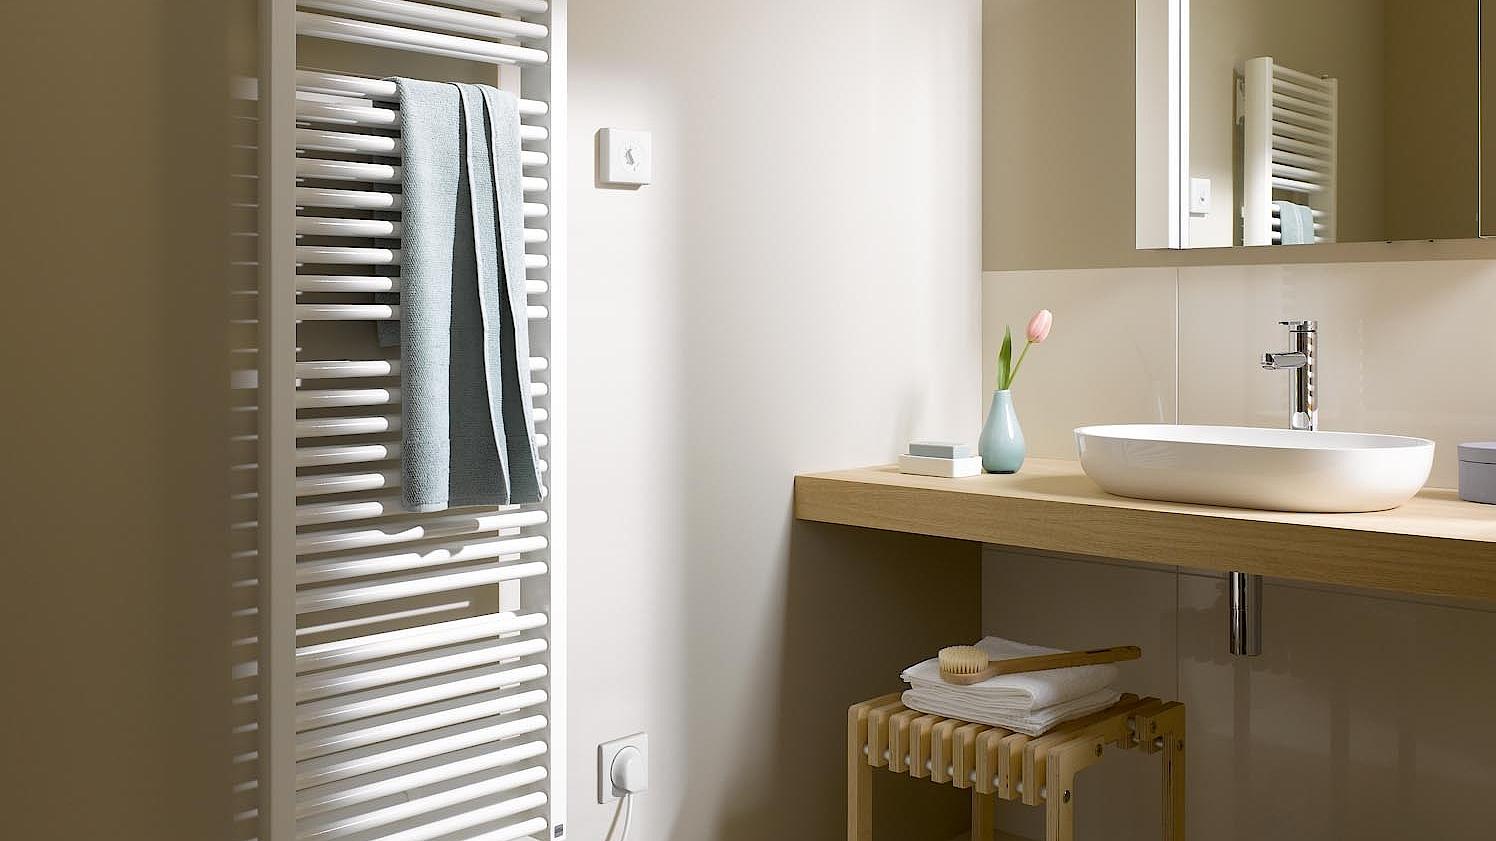 The Kermi Duett designer and bathroom radiator is also available in an electric version.